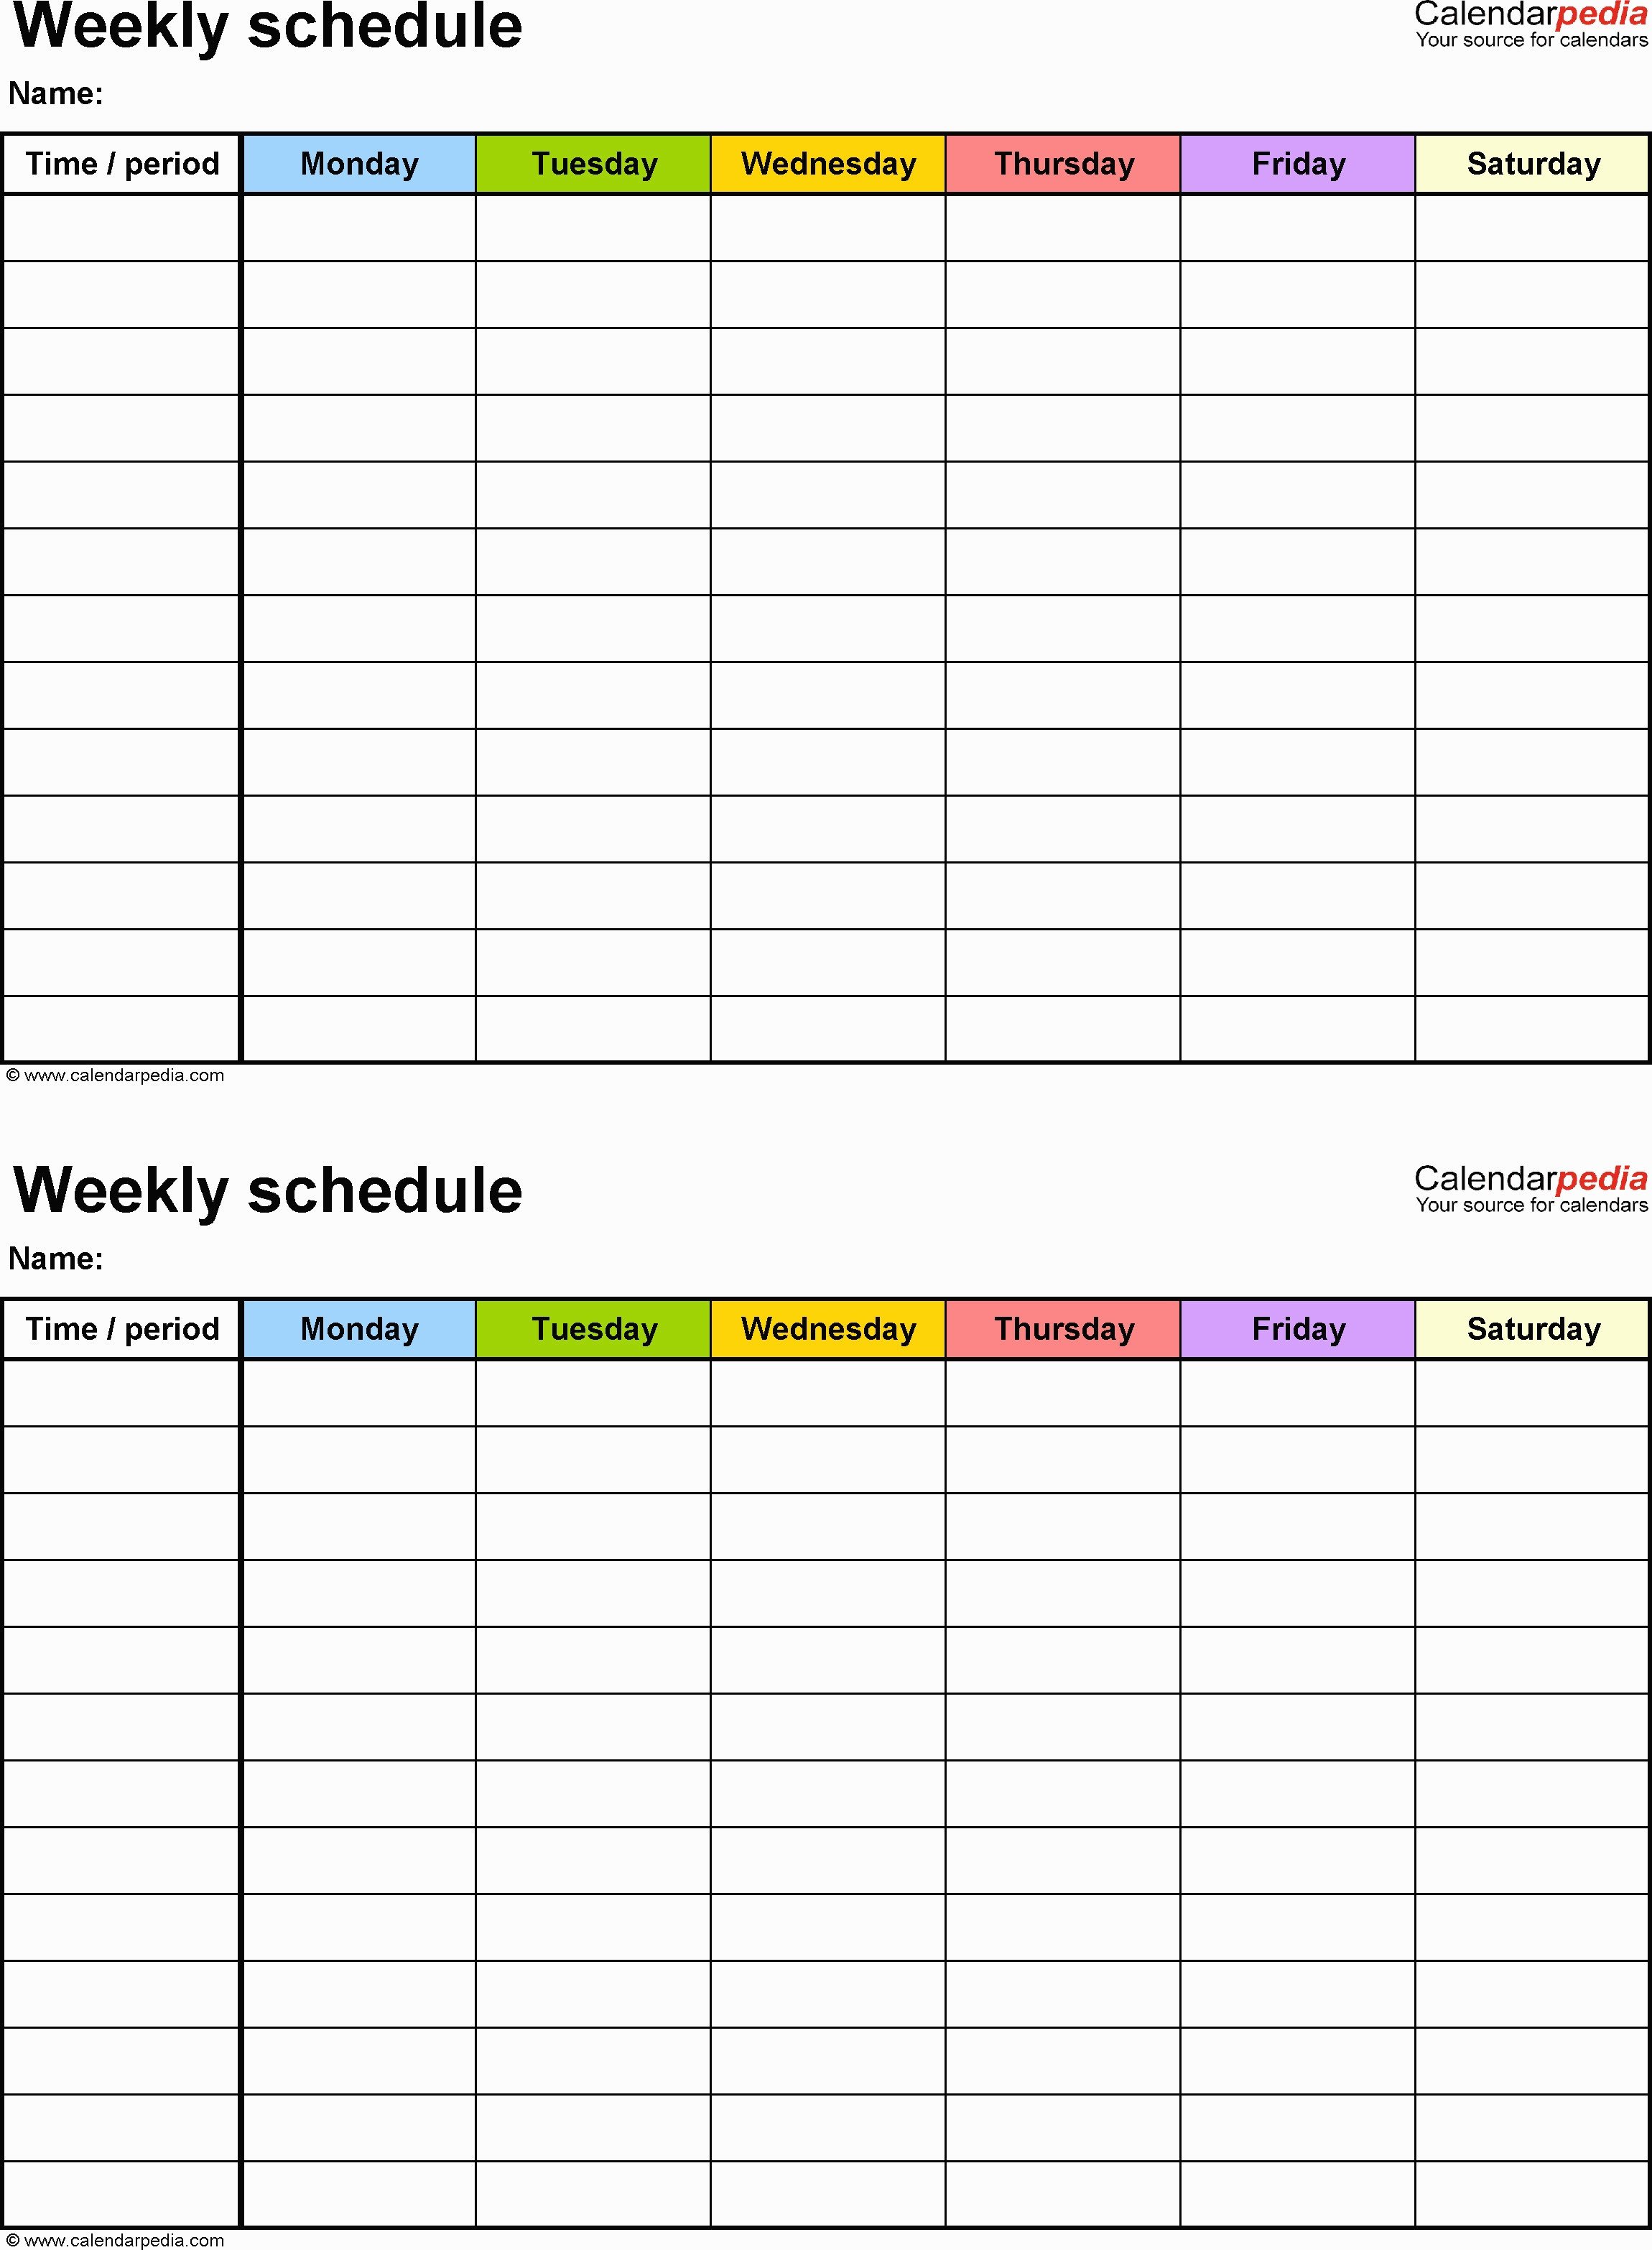 Sports Schedule Maker Excel Template Sports Schedule Maker Excel Template the Hidden Agenda